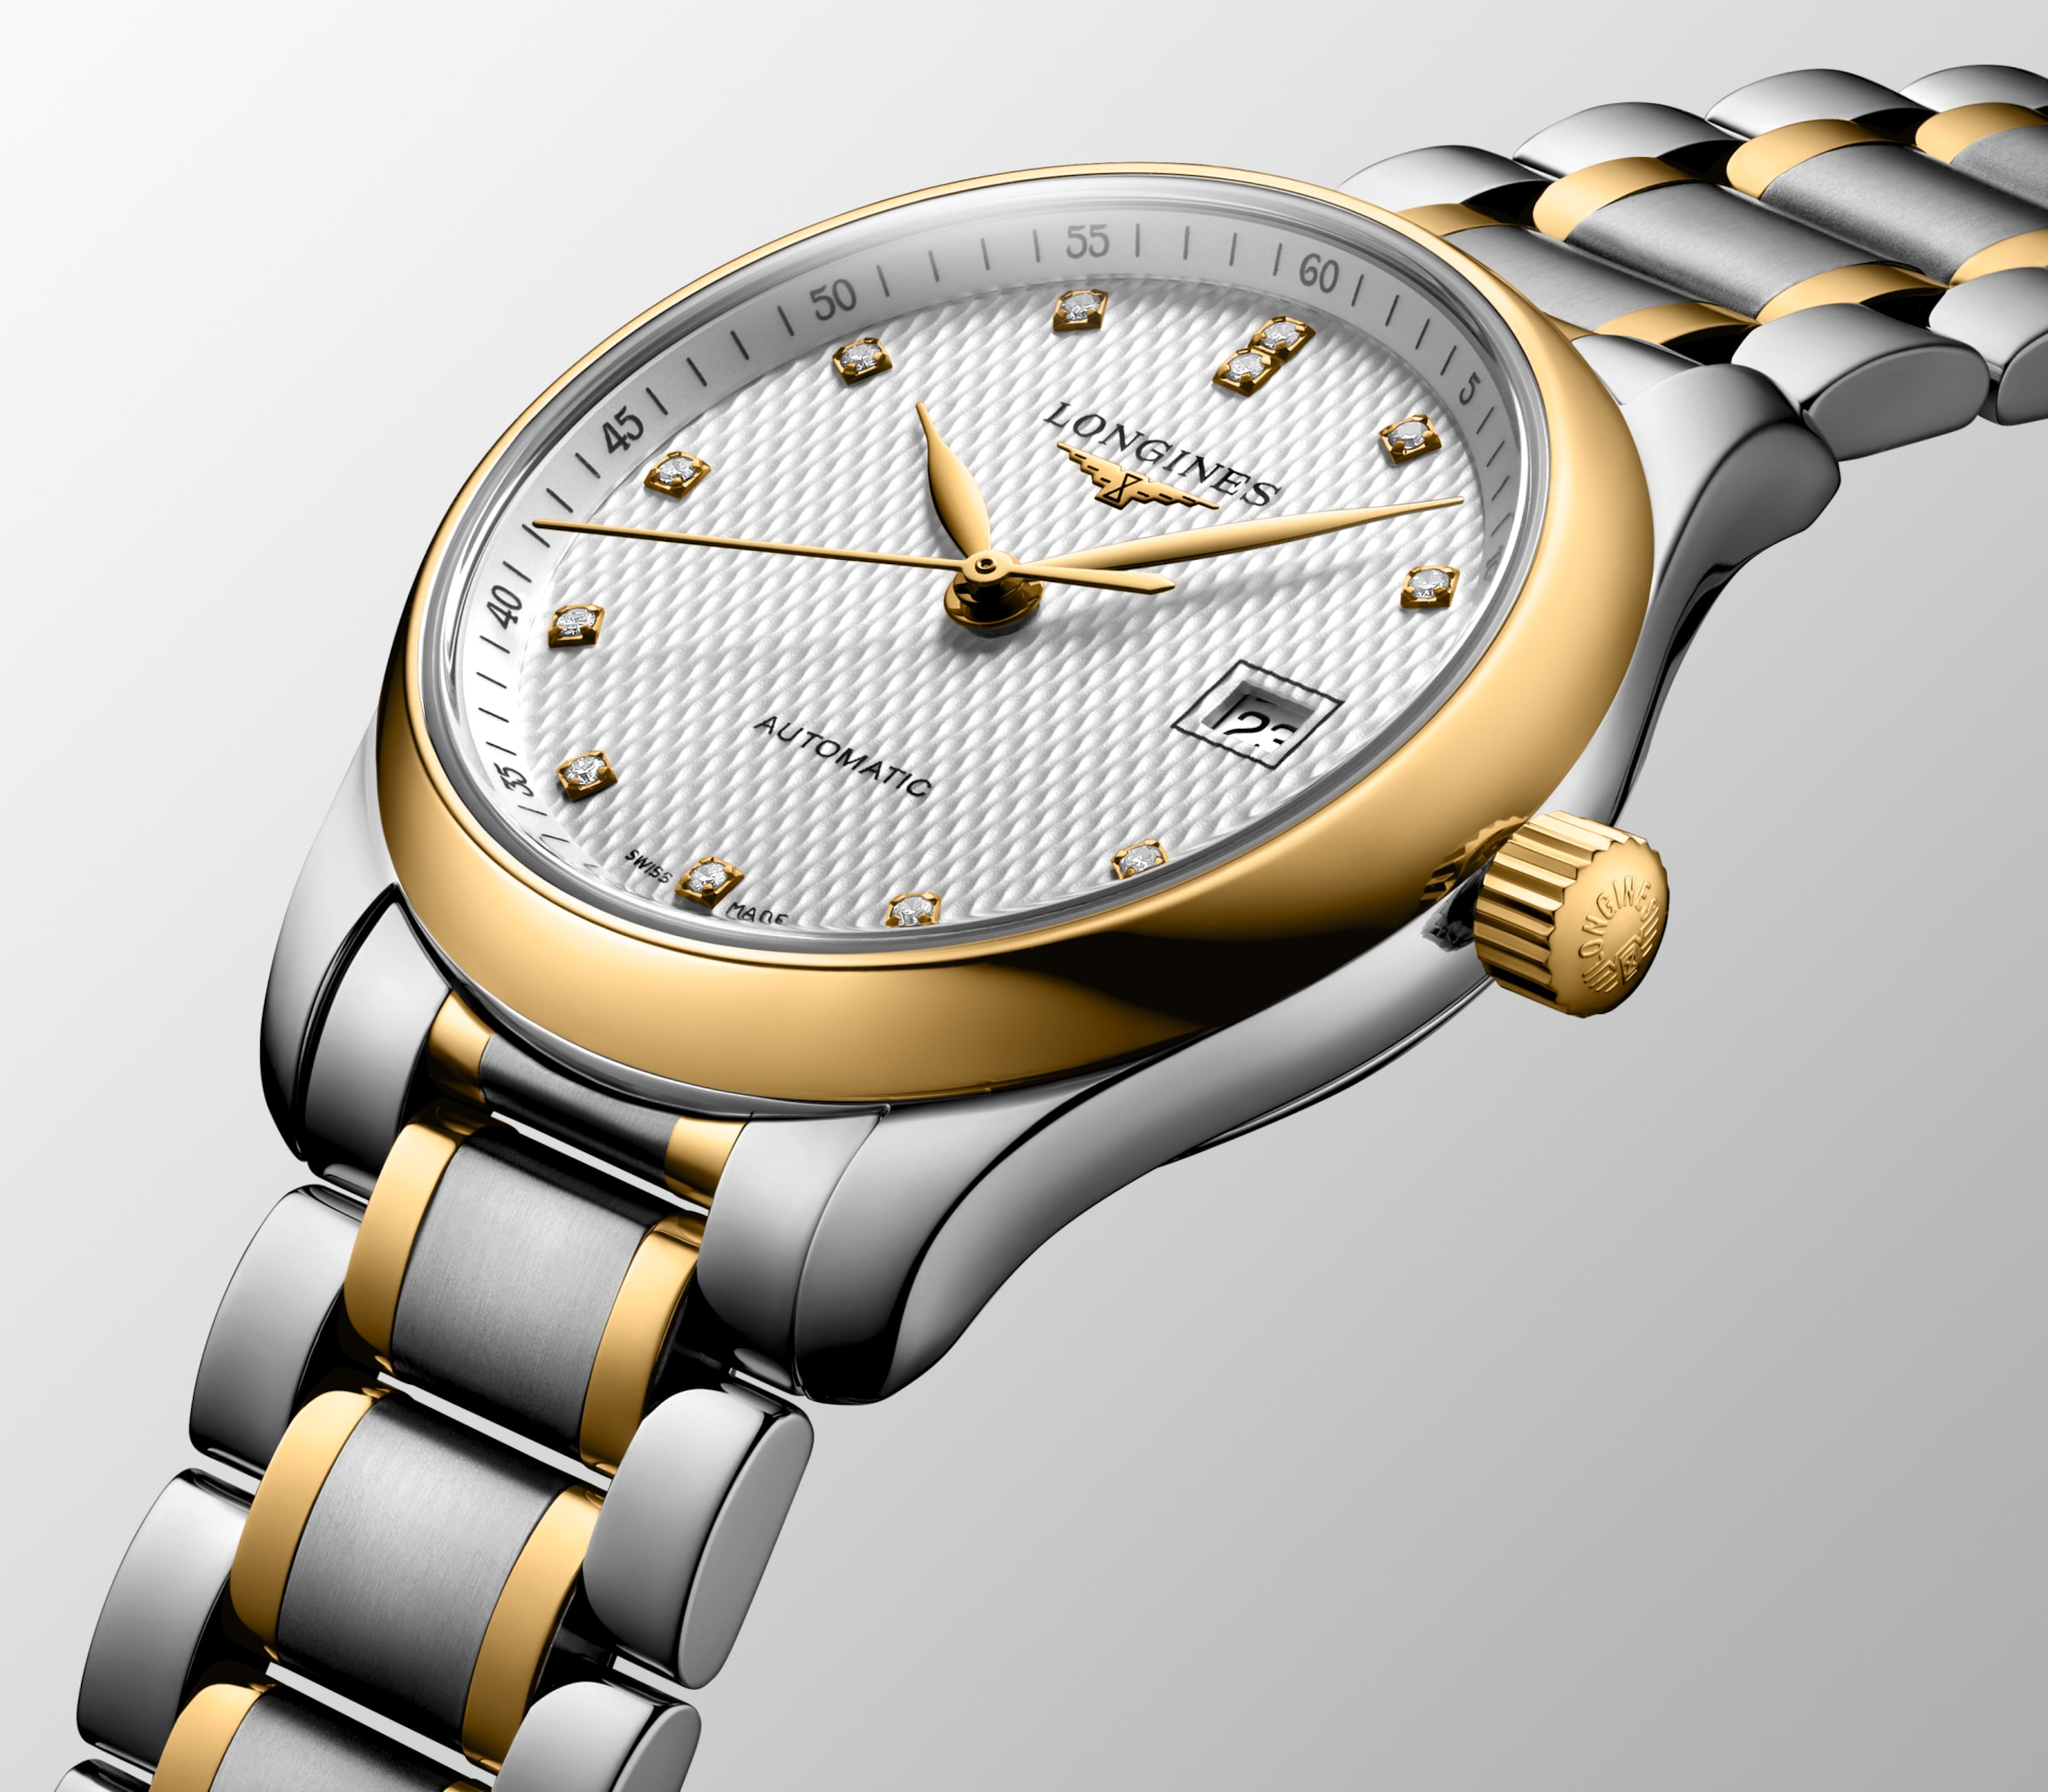 Longines MASTER COLLECTION Automatic Stainless steel and 18 karat yellow gold cap 200 Watch - L2.257.5.77.7